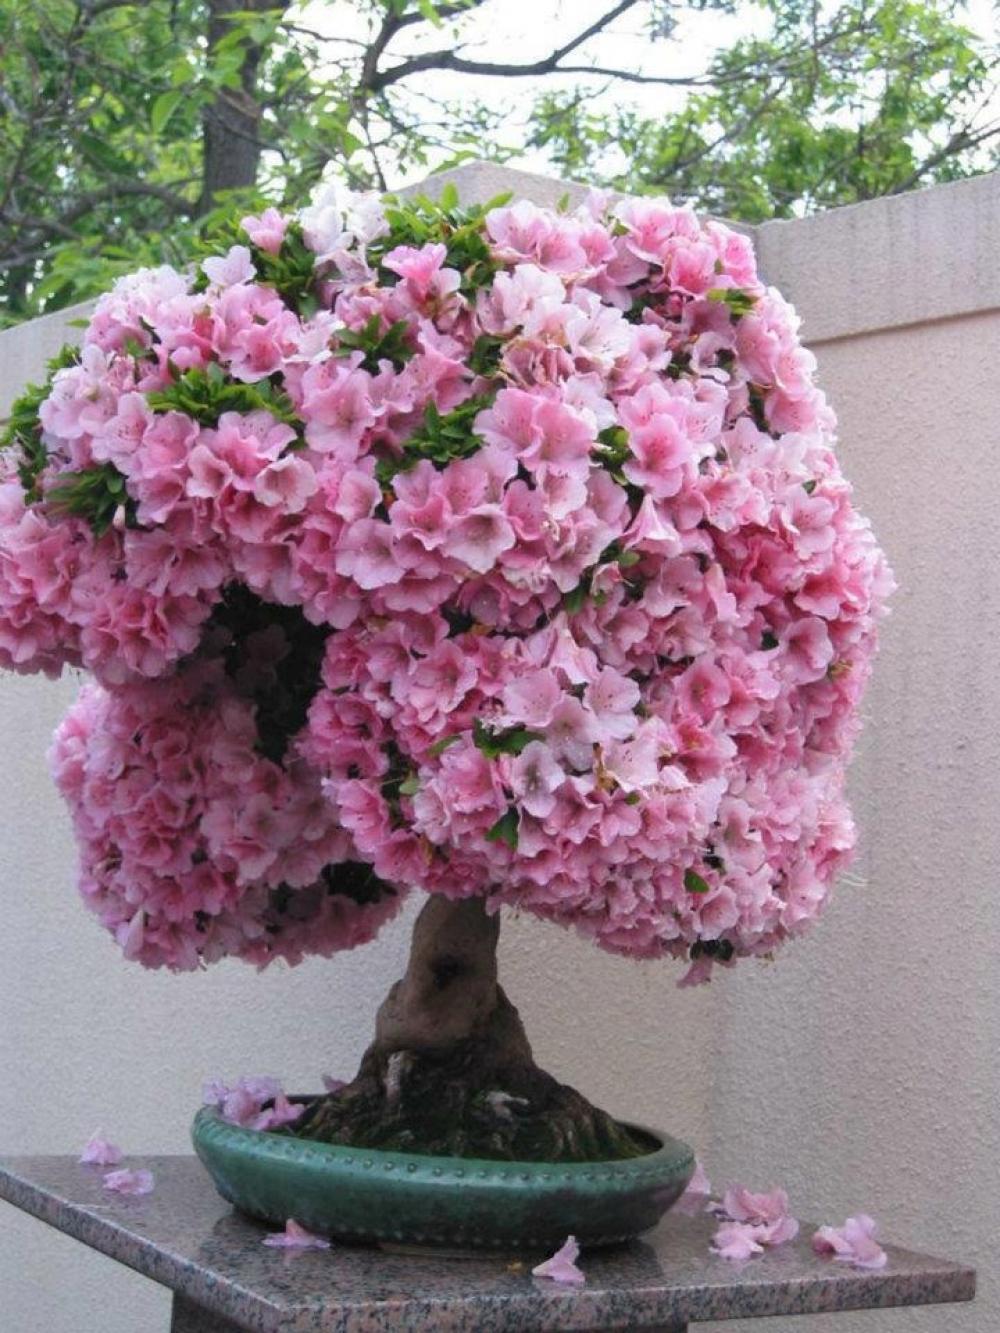 54-Unique-And-Attractive-Bonsai-Tree-Design-Ideas-Beautiful-Pink-Bonsai-Flower-Collection-For-Interiors-Decoration